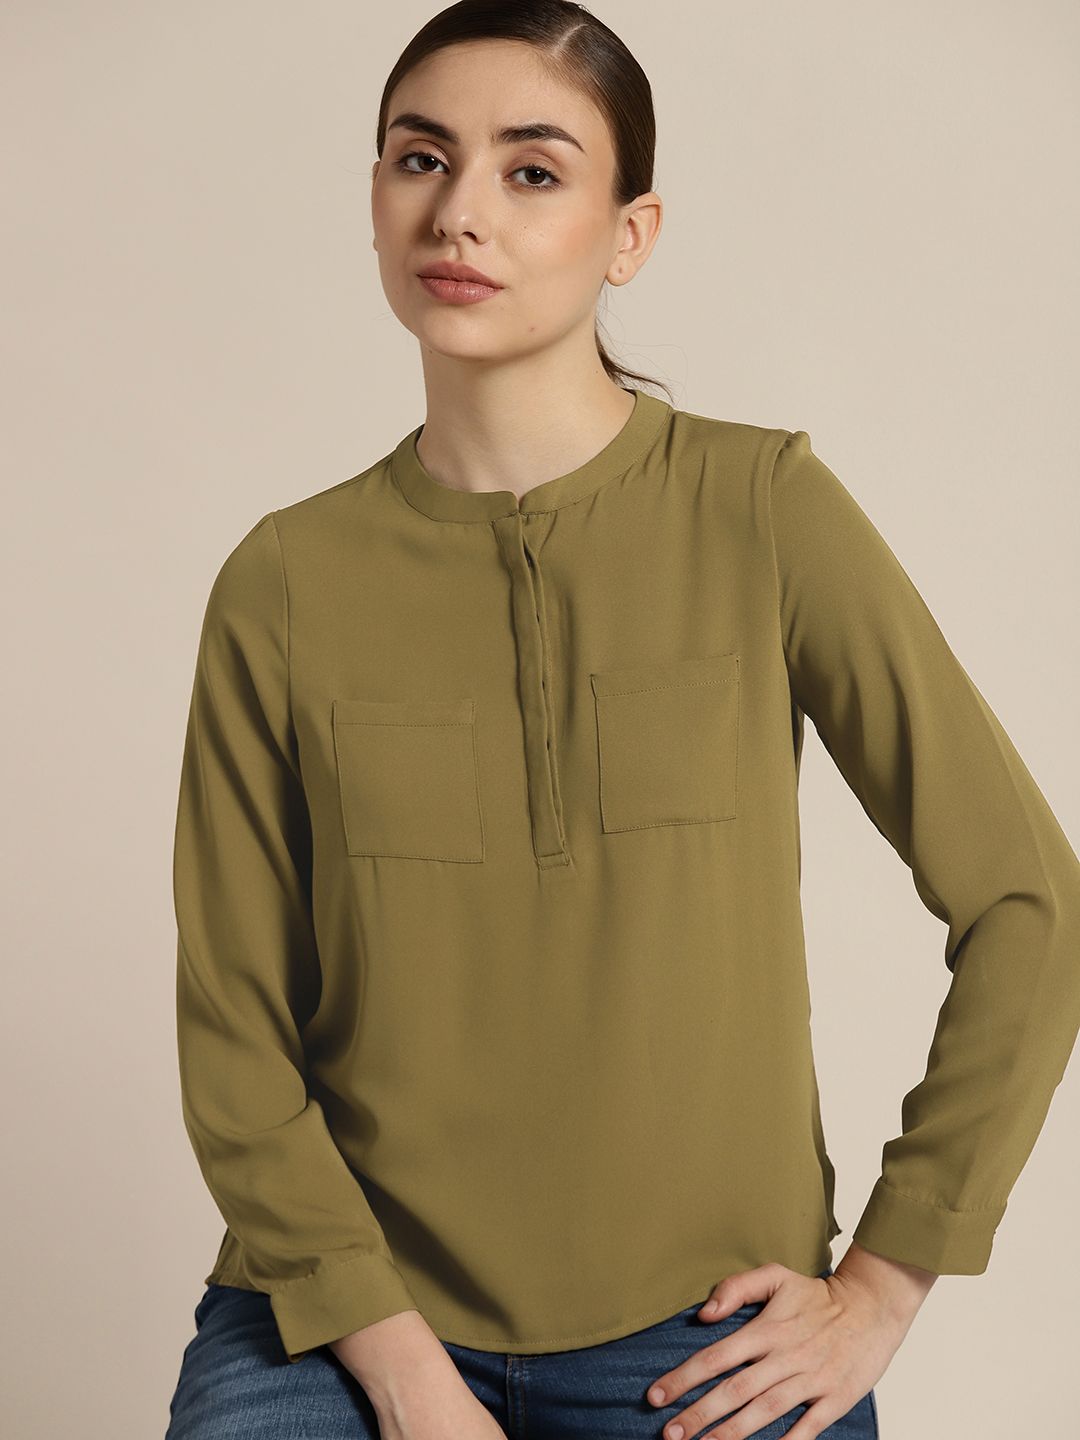 ether Olive Green Mandarin Collar Shirt Style Top Price in India